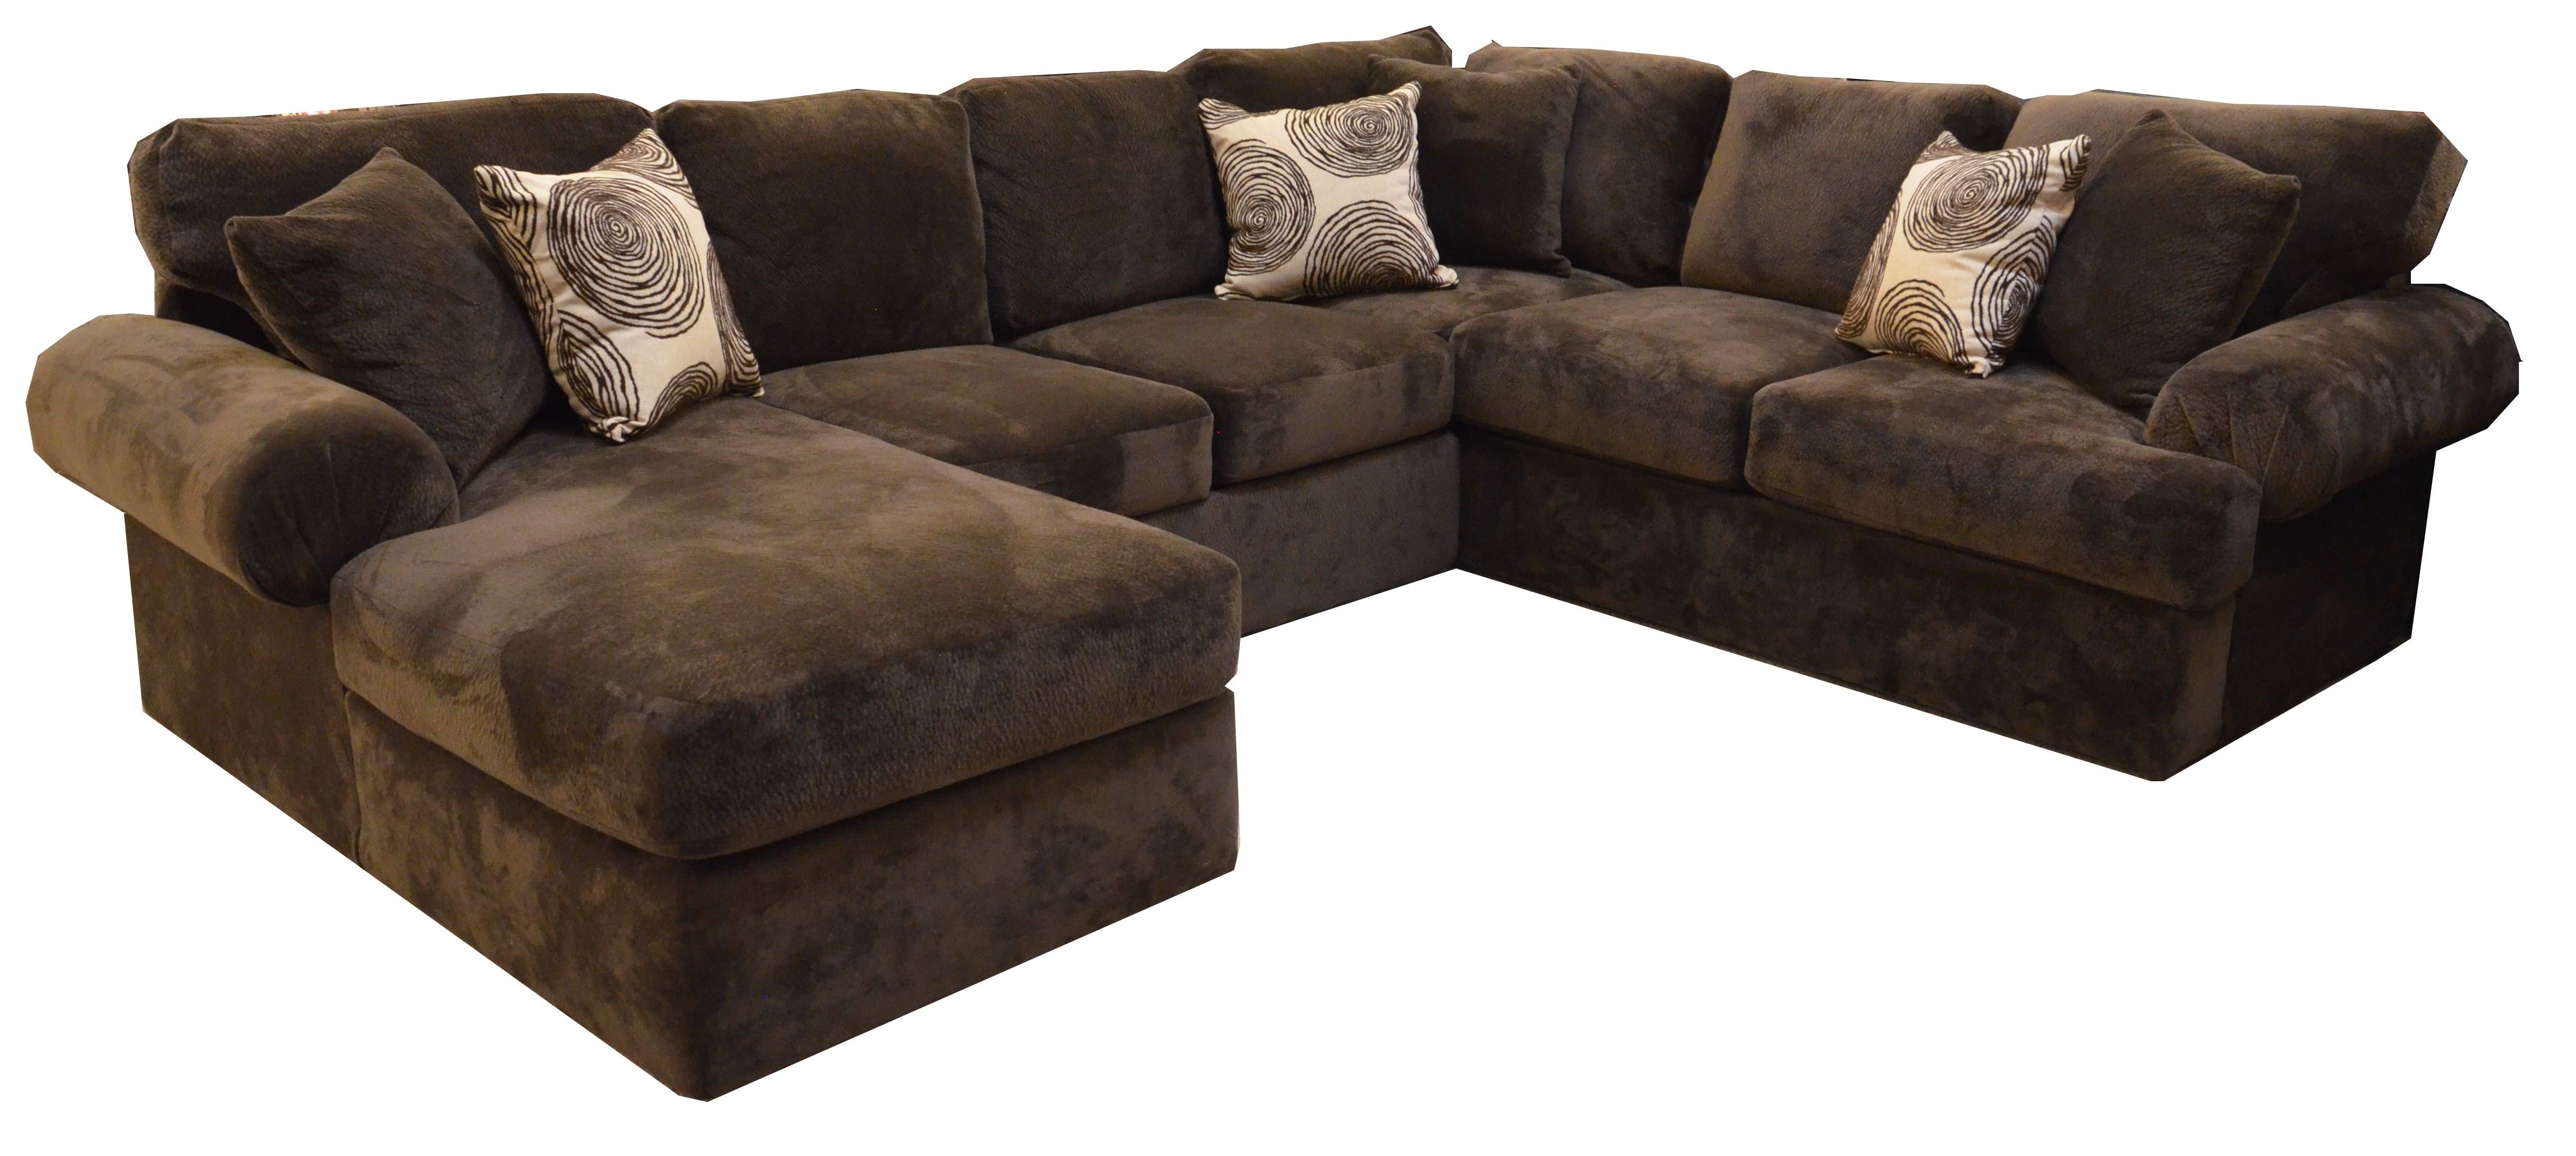 Wonderful Bradley Sectional Sofa 54 For Your 7 Seat Sectional Sofa Intended For Bradley Sectional Sofas (Photo 4 of 15)